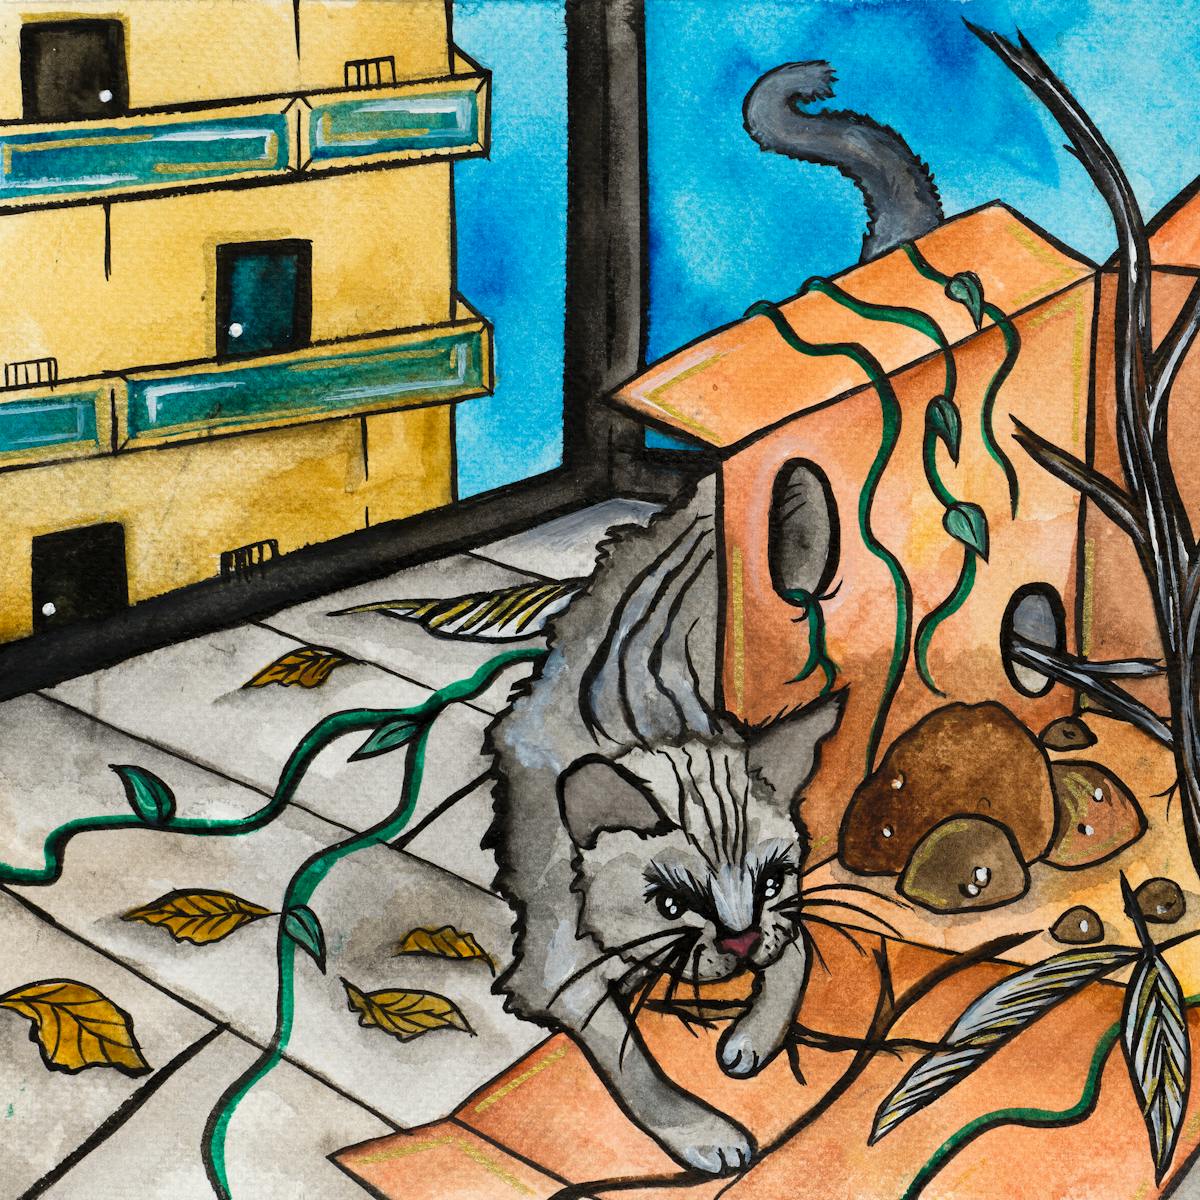 Colourful artwork. The artwork shows a flatpack box which is open on the front facing side, with several holes in it, on a tiled foor. There are tree branches and vines growing up through the box and leaves covering the floor. A grey cat is curled around the box with it's tail curling above the box. A brown cat's head can be seen on the right side of the frame bending towards a vine. In the background of the artwork, there are two yellow multi-story housing blocks with green doors and balconies. 